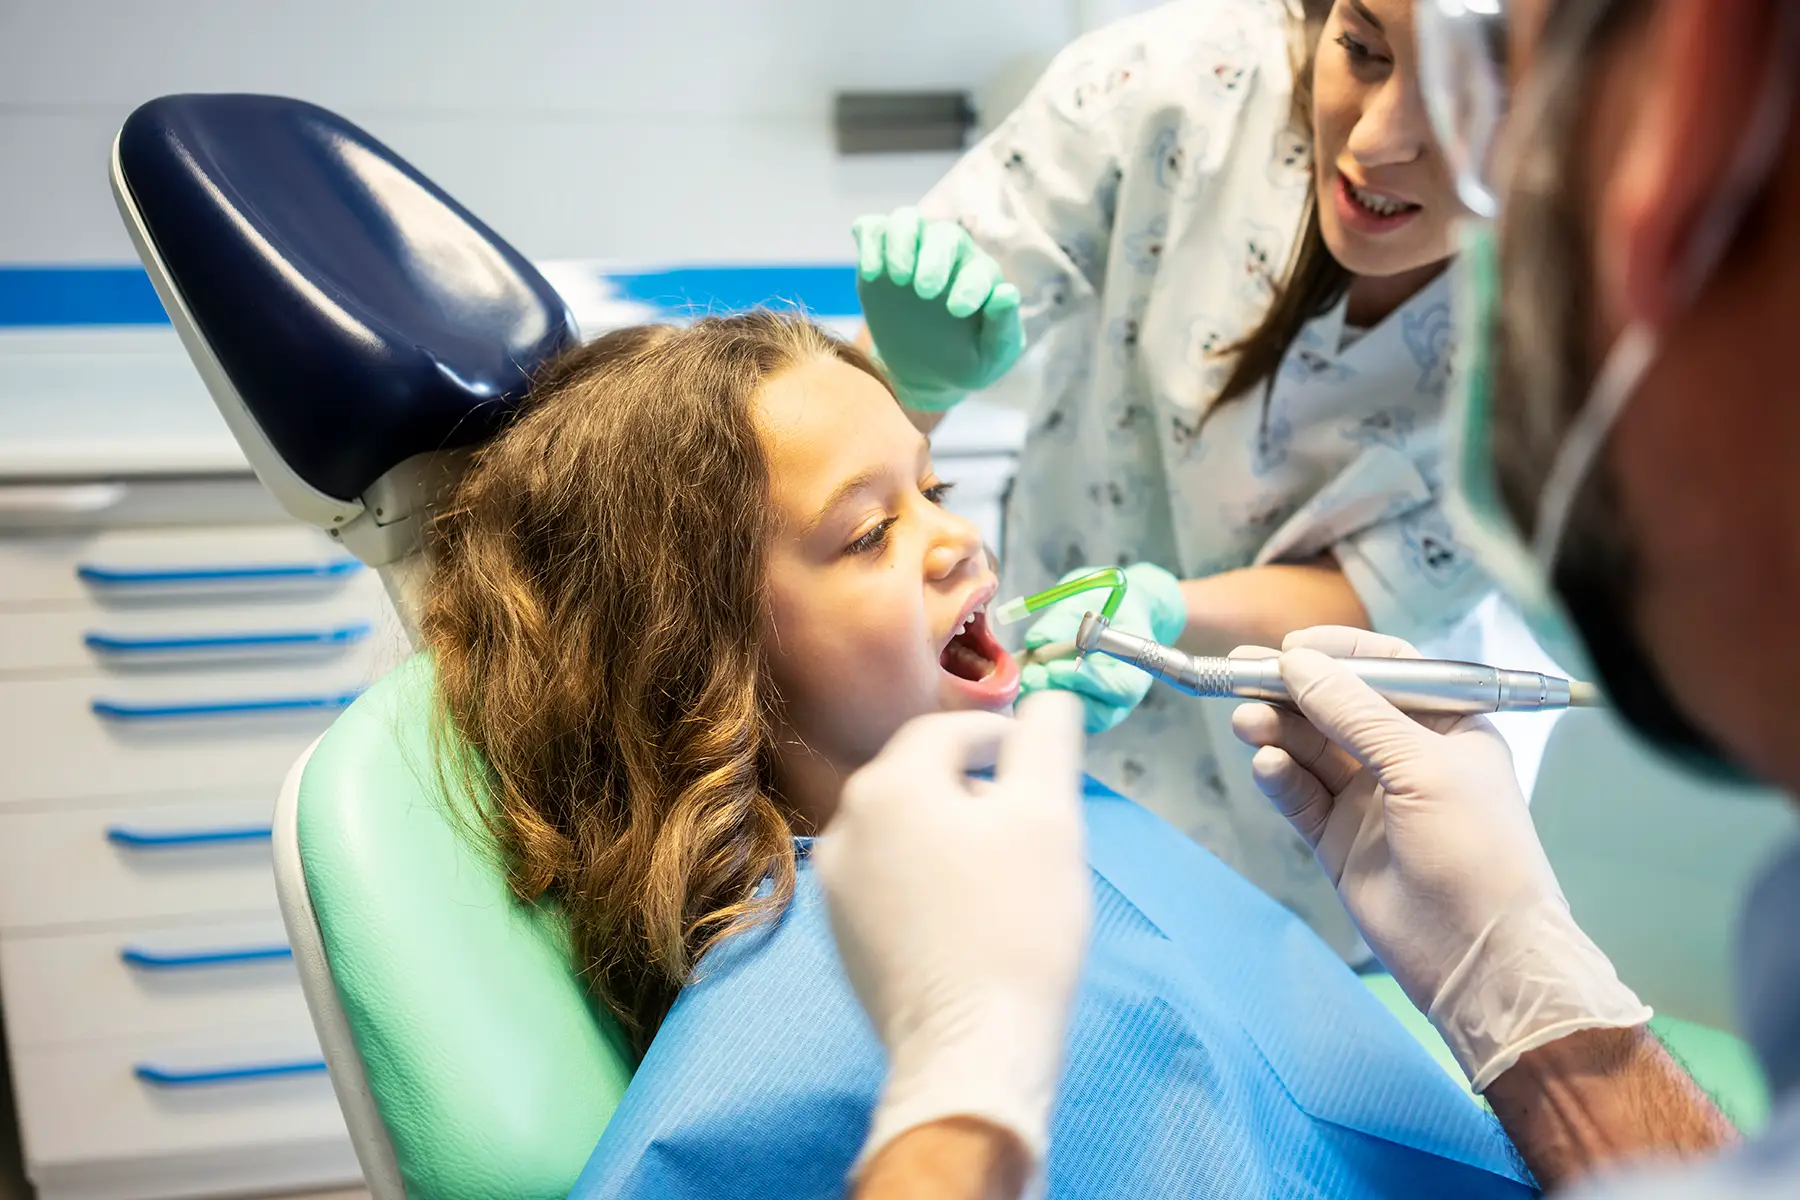 A girl in a dentist's chair having various dental instruments placed into her mouth by two dentists